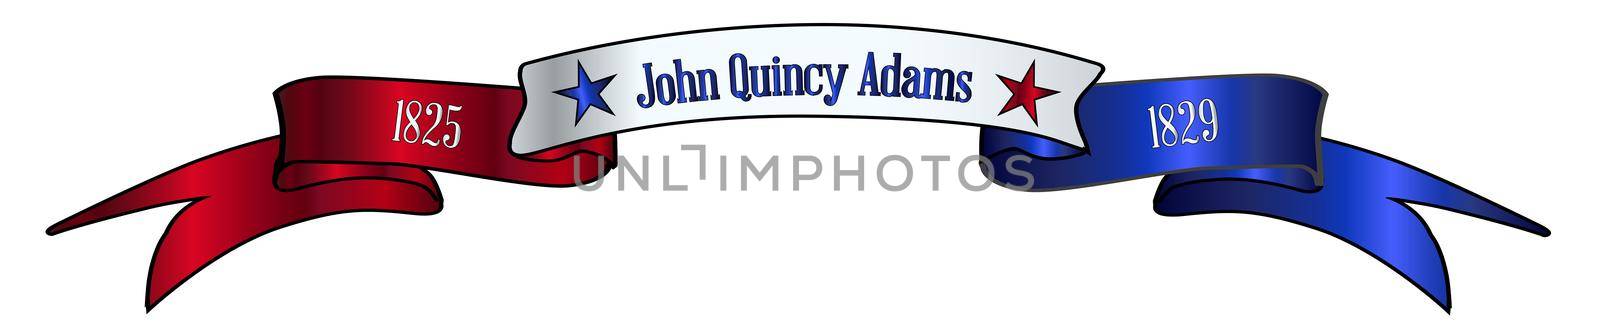 A red white and blue satin or silk ribbon banner with the text John Quincy Adams and stars and date in office